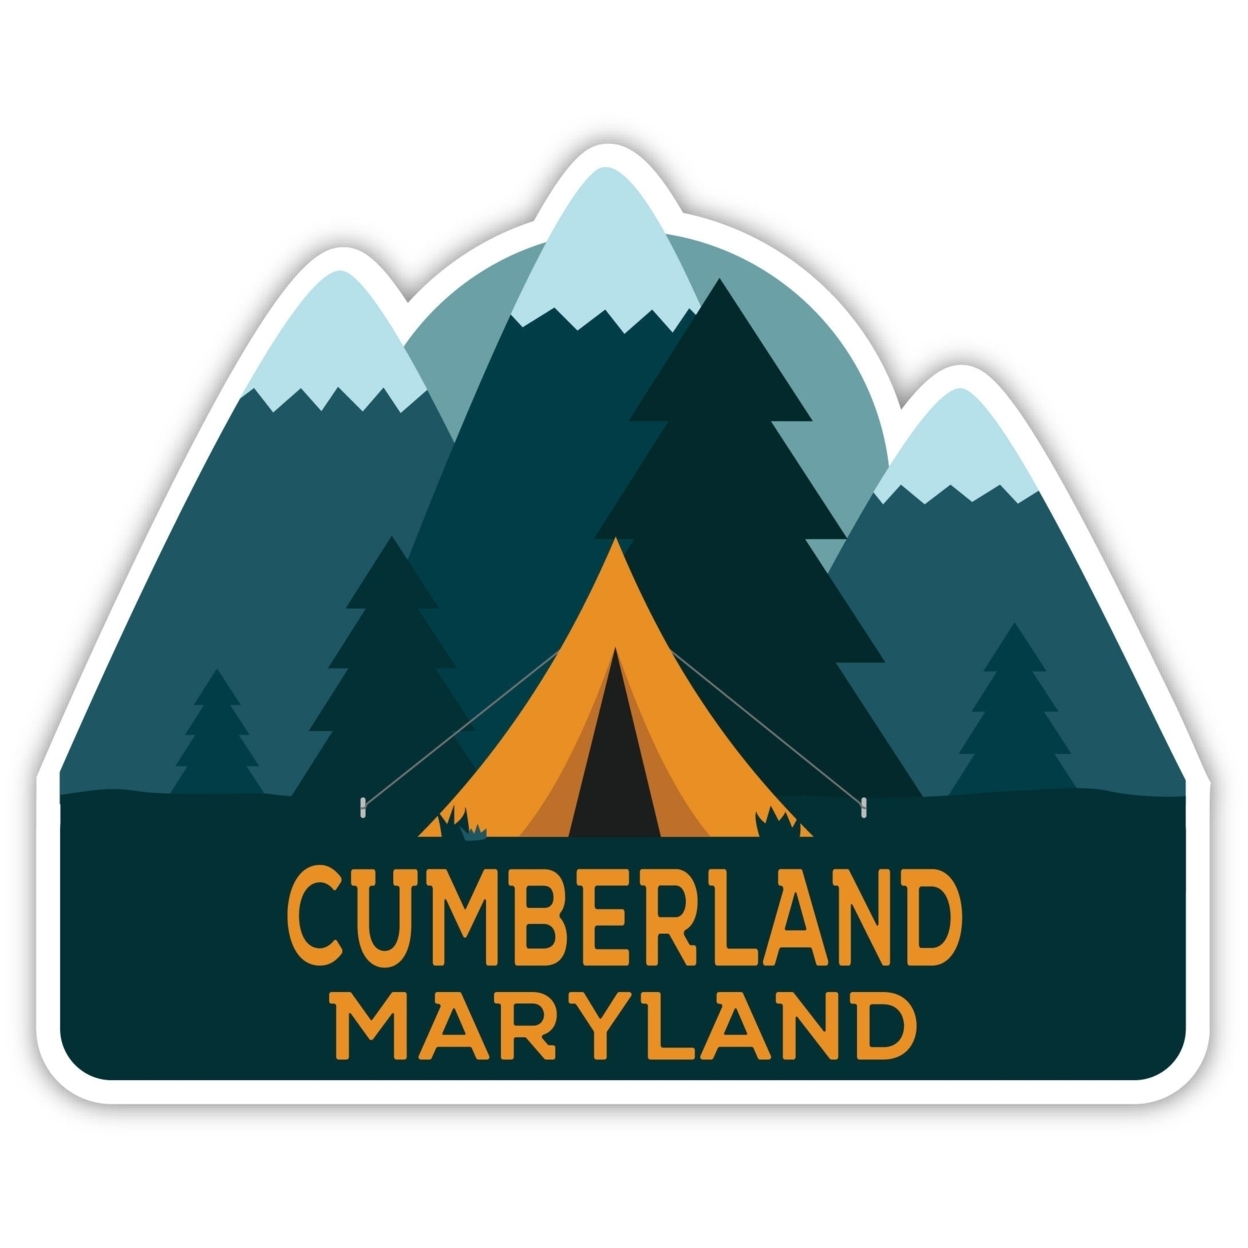 Cumberland Maryland Souvenir Decorative Stickers (Choose Theme And Size) - 4-Pack, 4-Inch, Tent